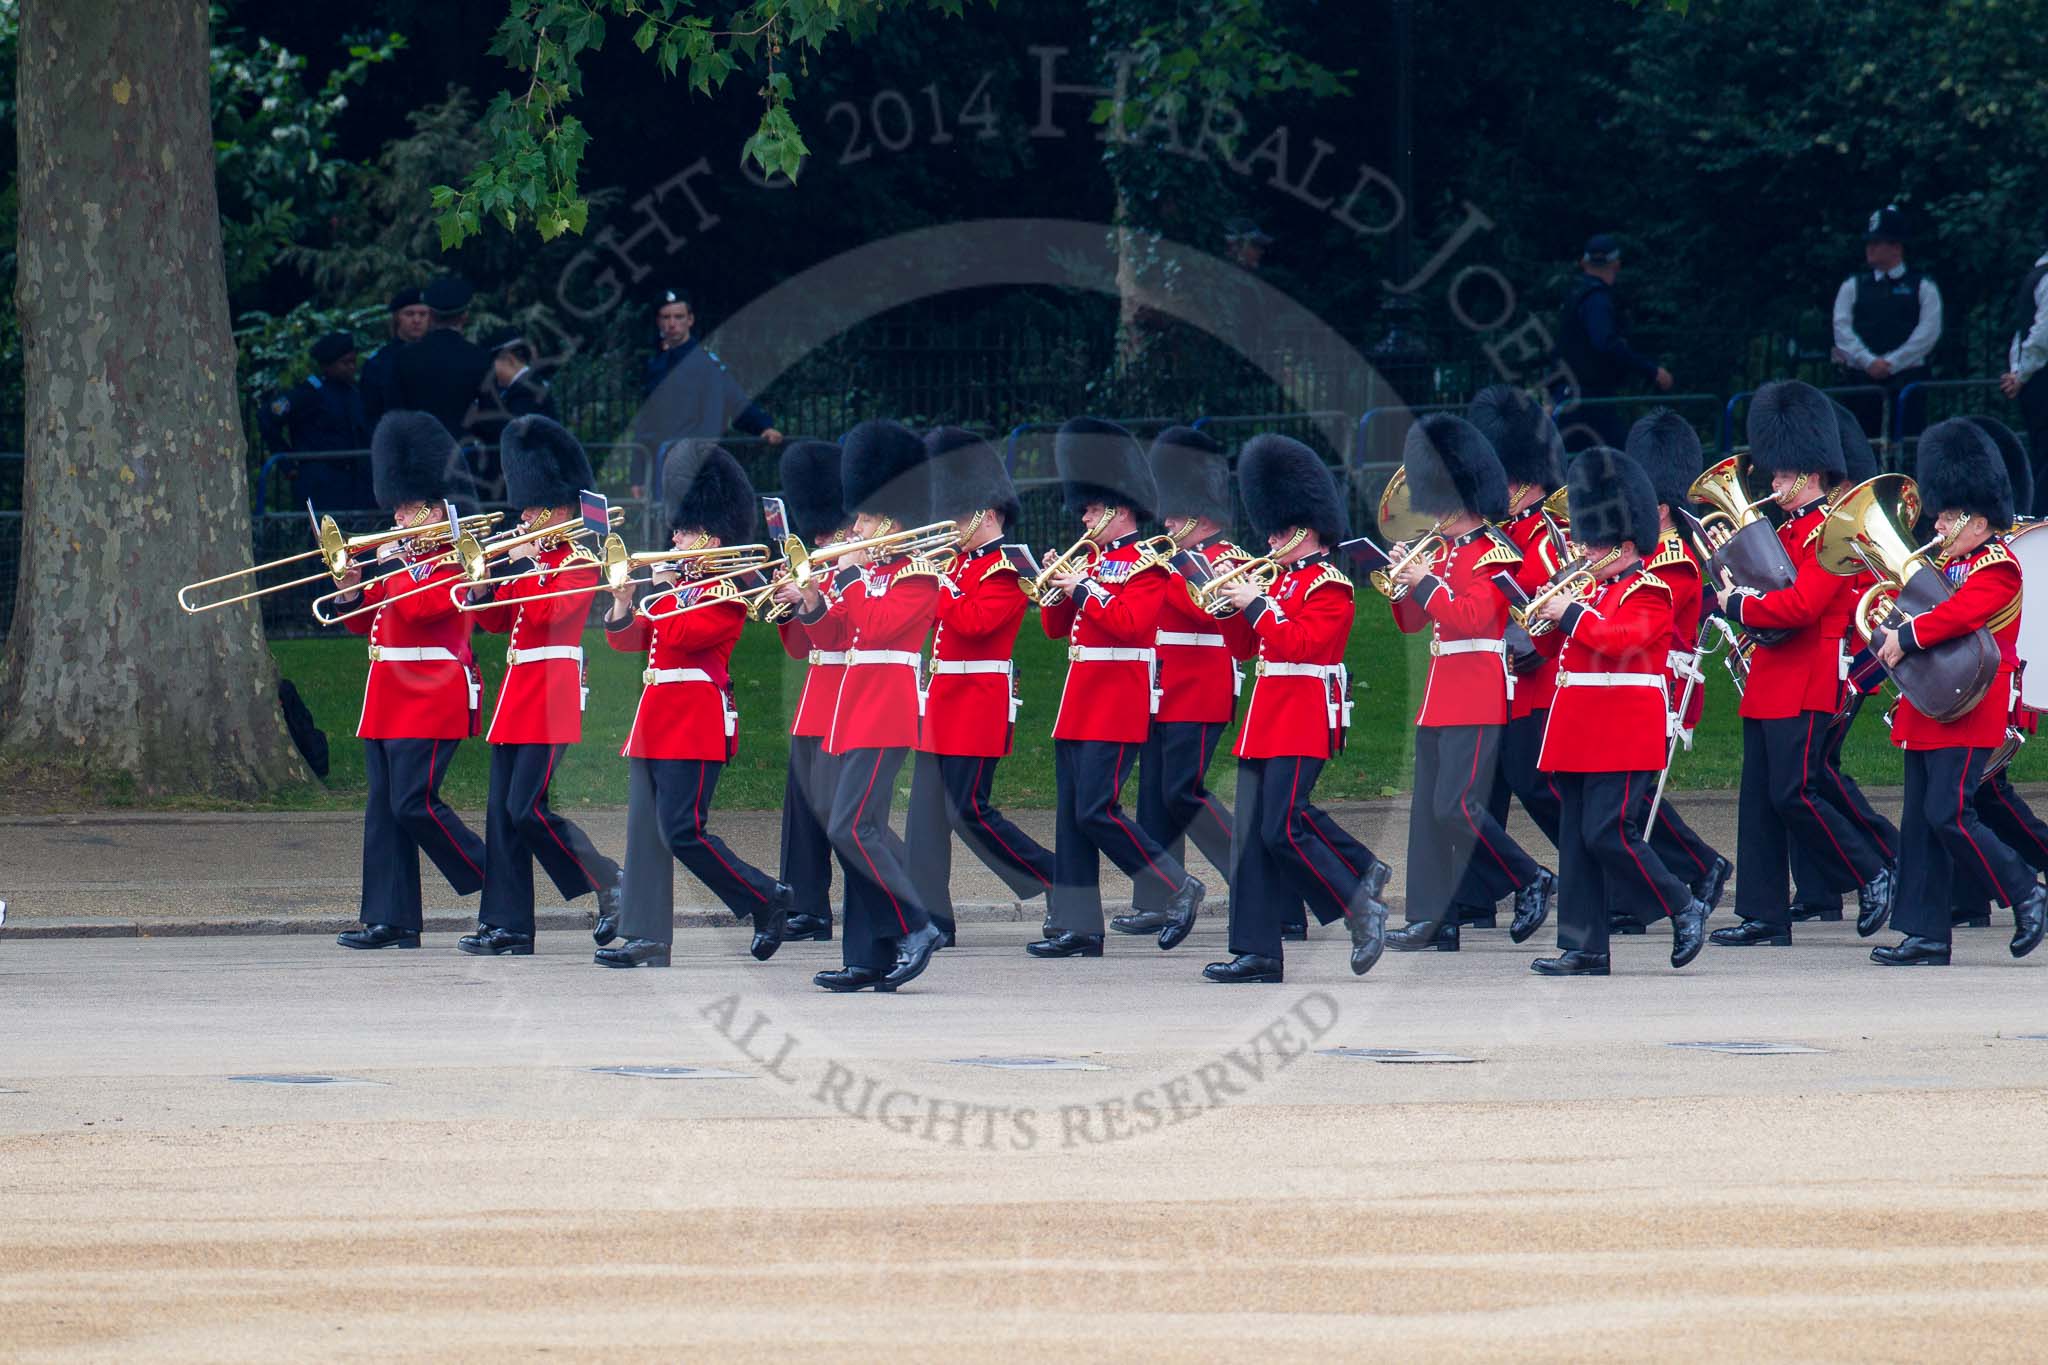 Trooping the Colour 2014.
Horse Guards Parade, Westminster,
London SW1A,

United Kingdom,
on 14 June 2014 at 10:14, image #88